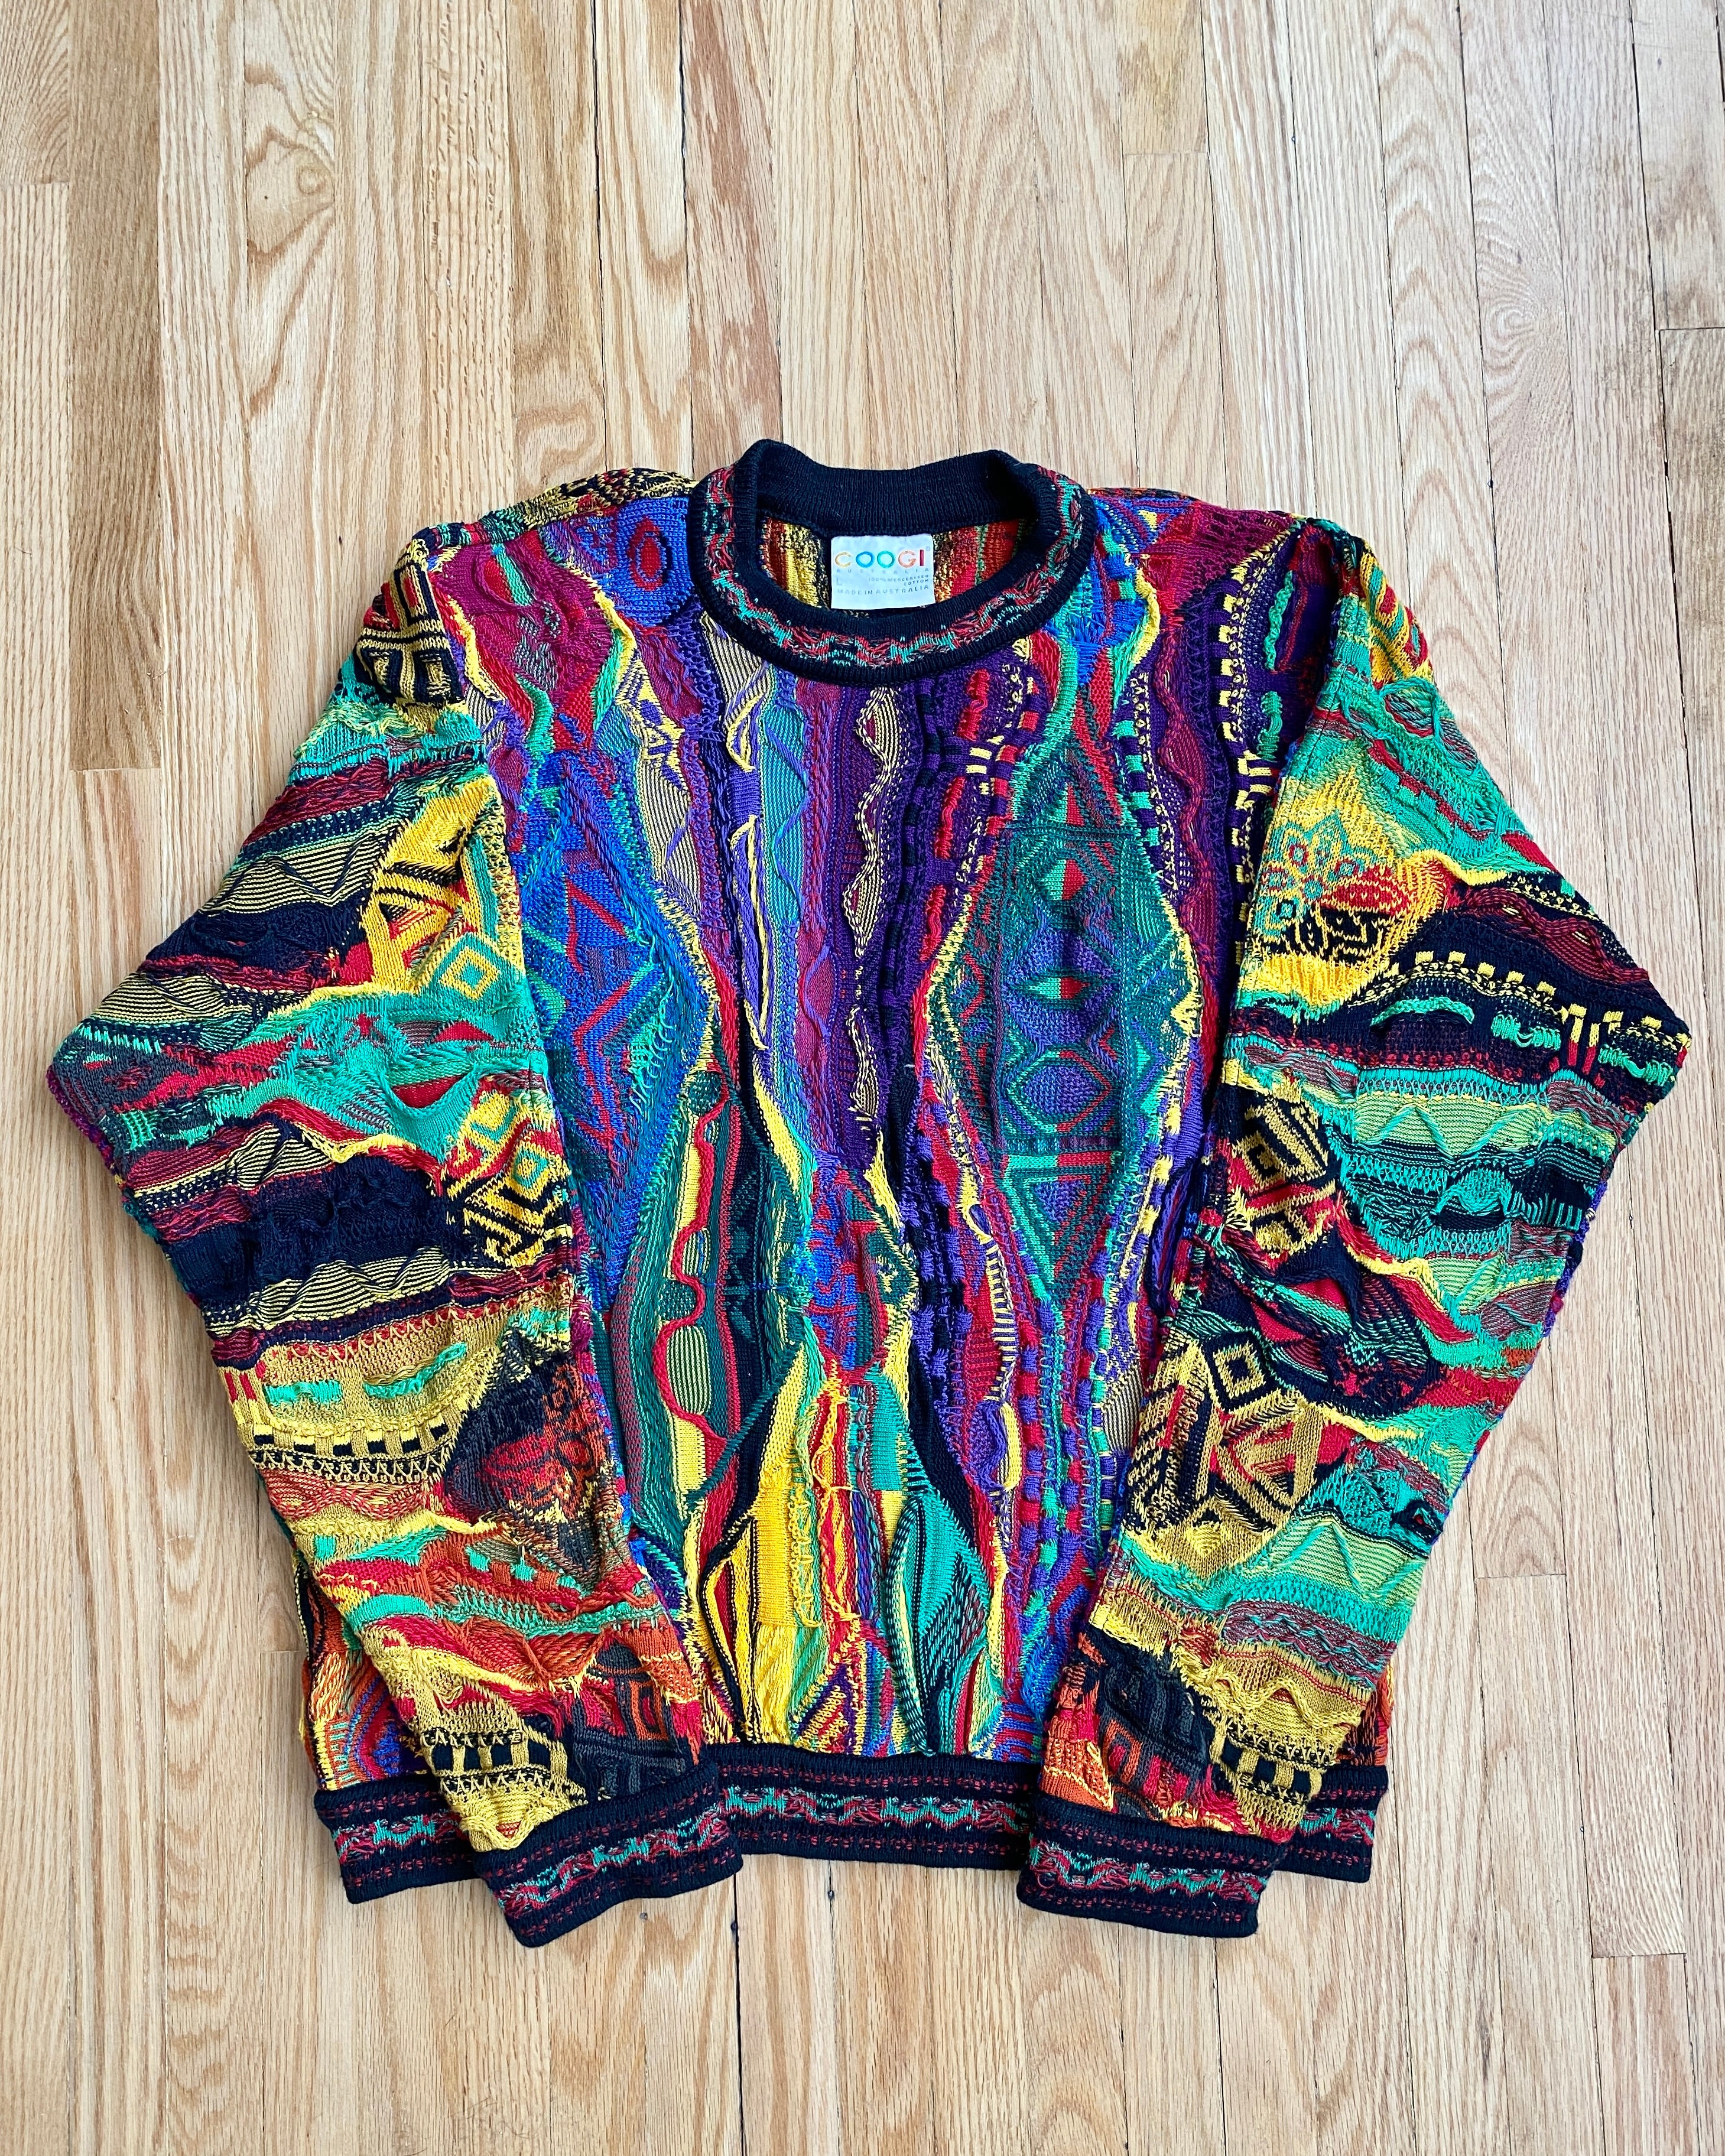 Vintage 1990s Authentic Coogi Ikat Jacquard Sweater Made in Australia